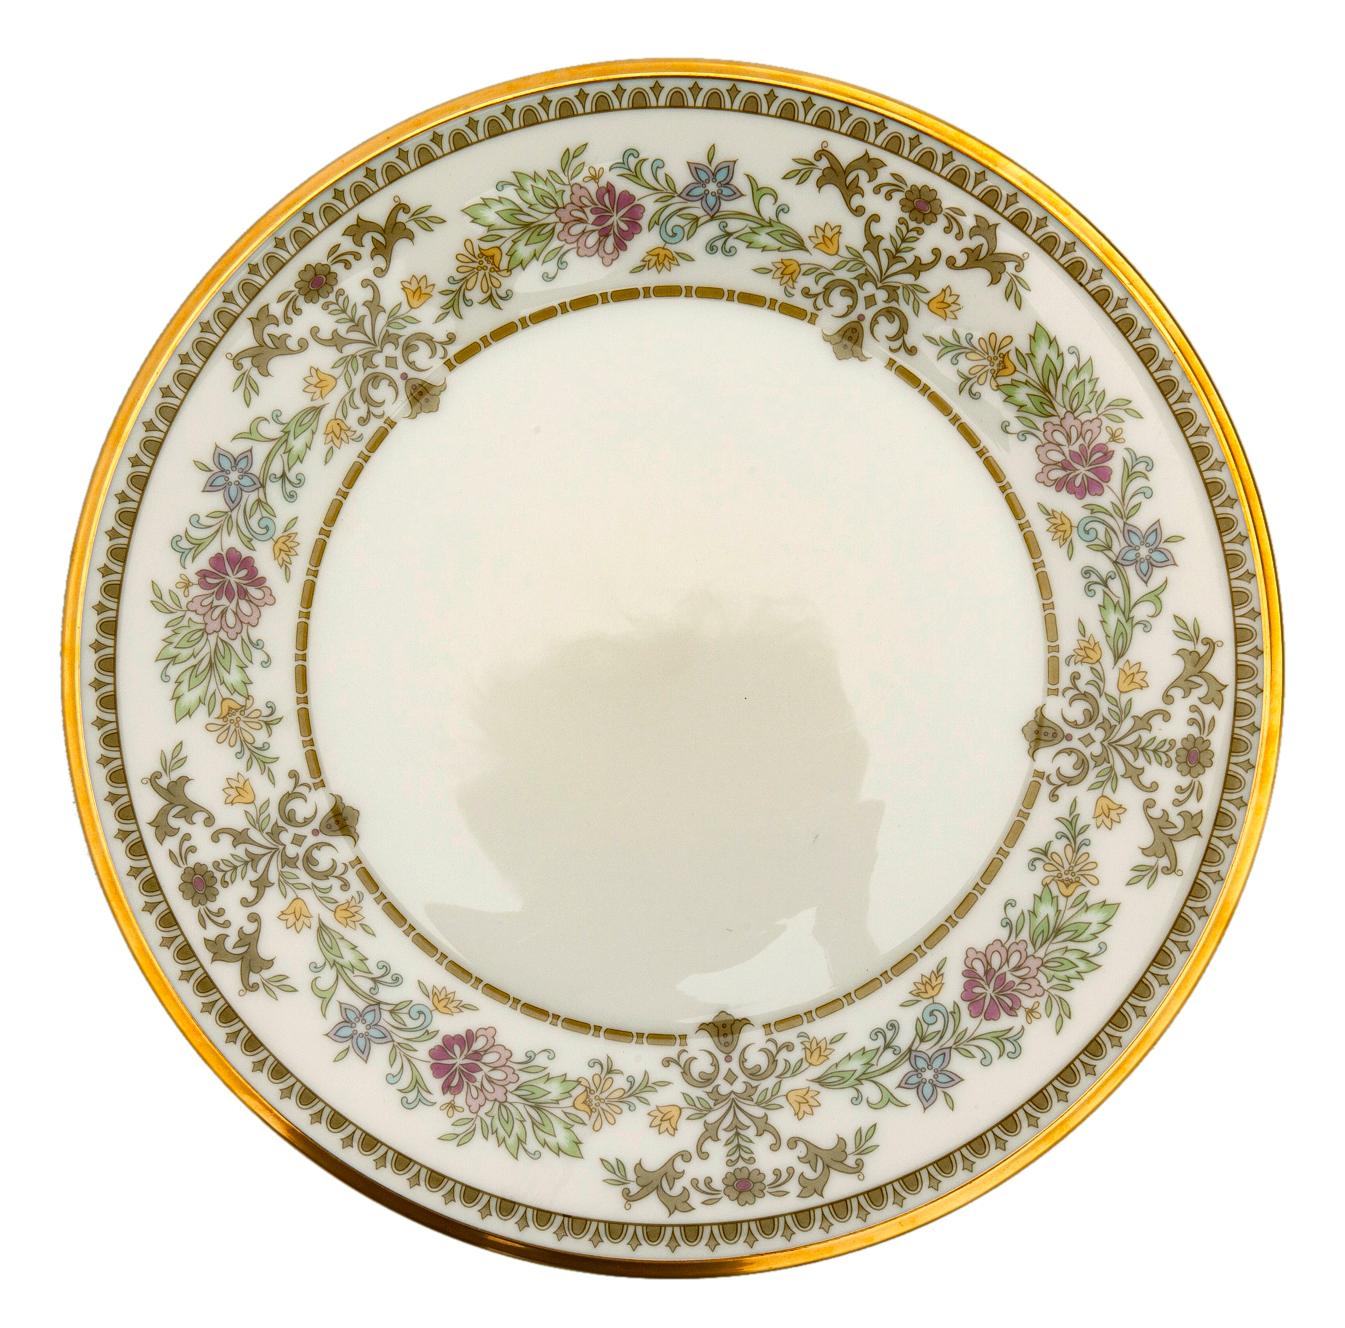 castle garden china by lenox